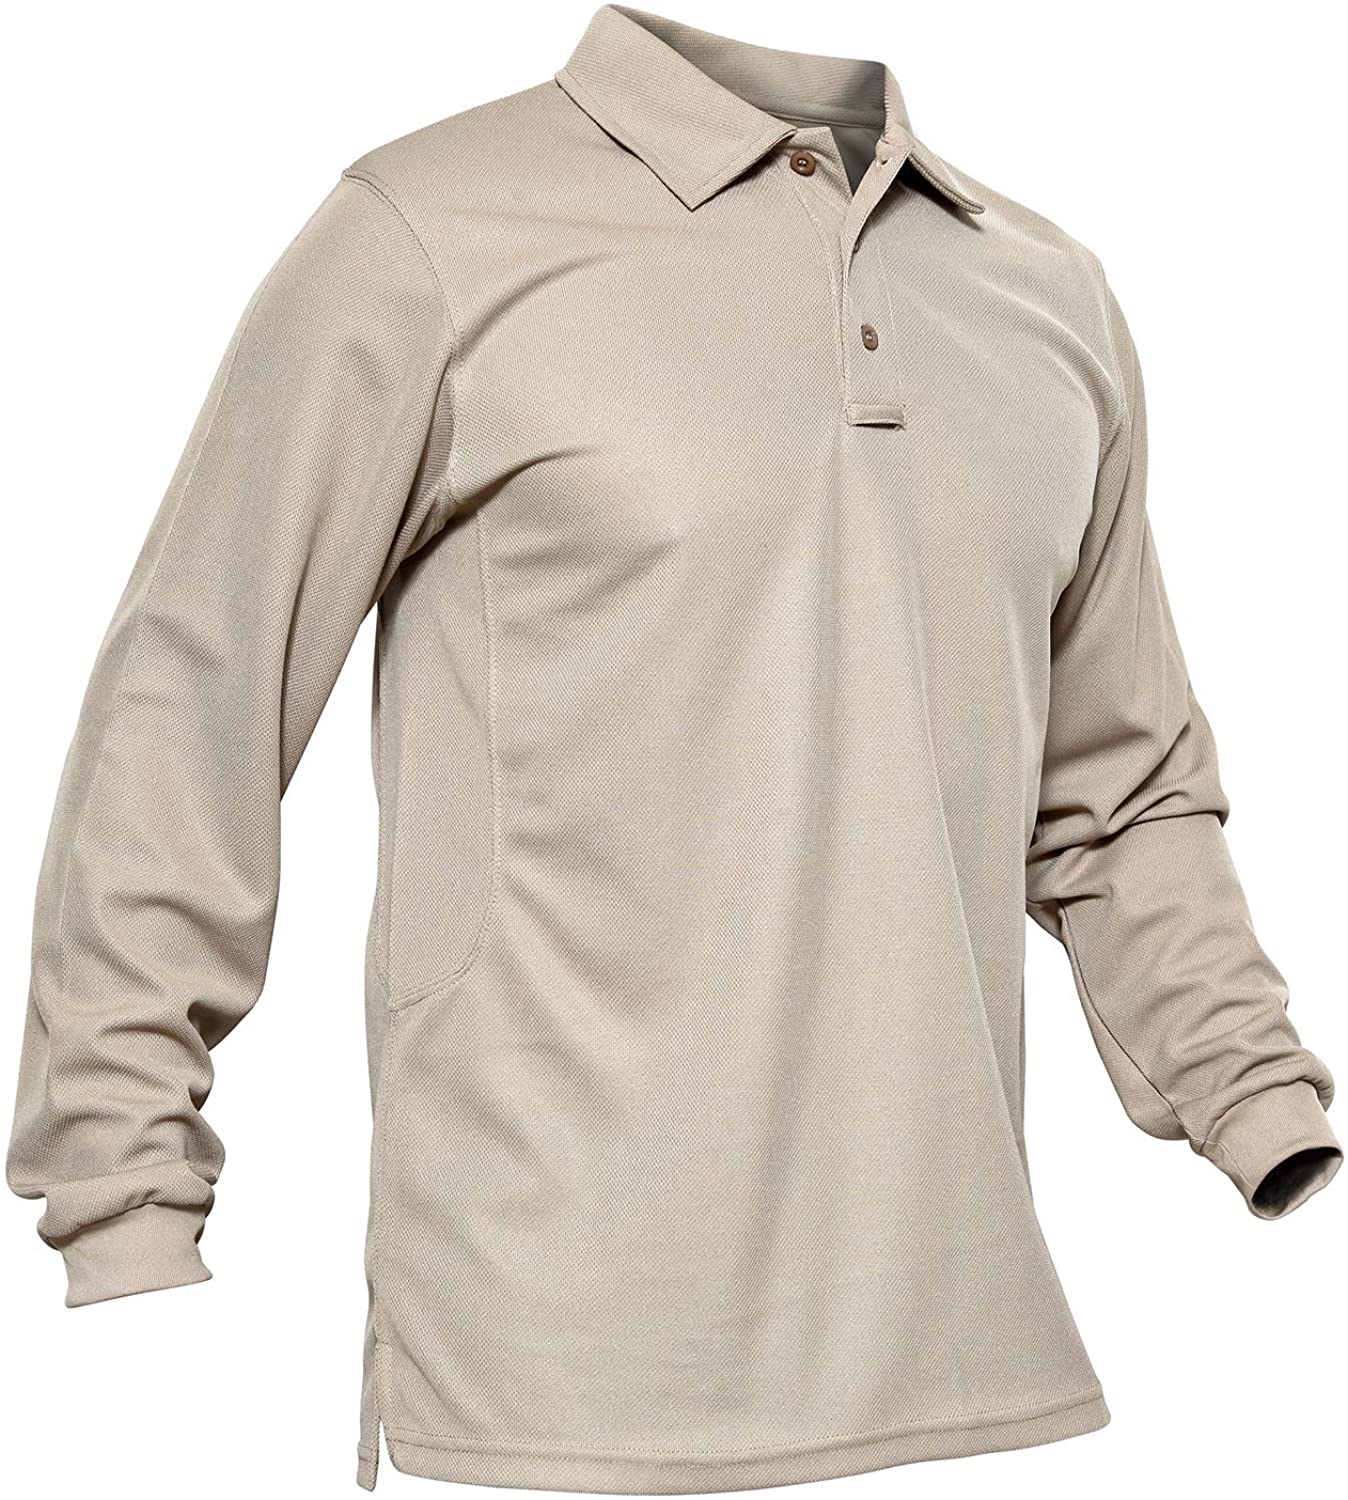 Men's Tactical Quick Dry Polo Shirts